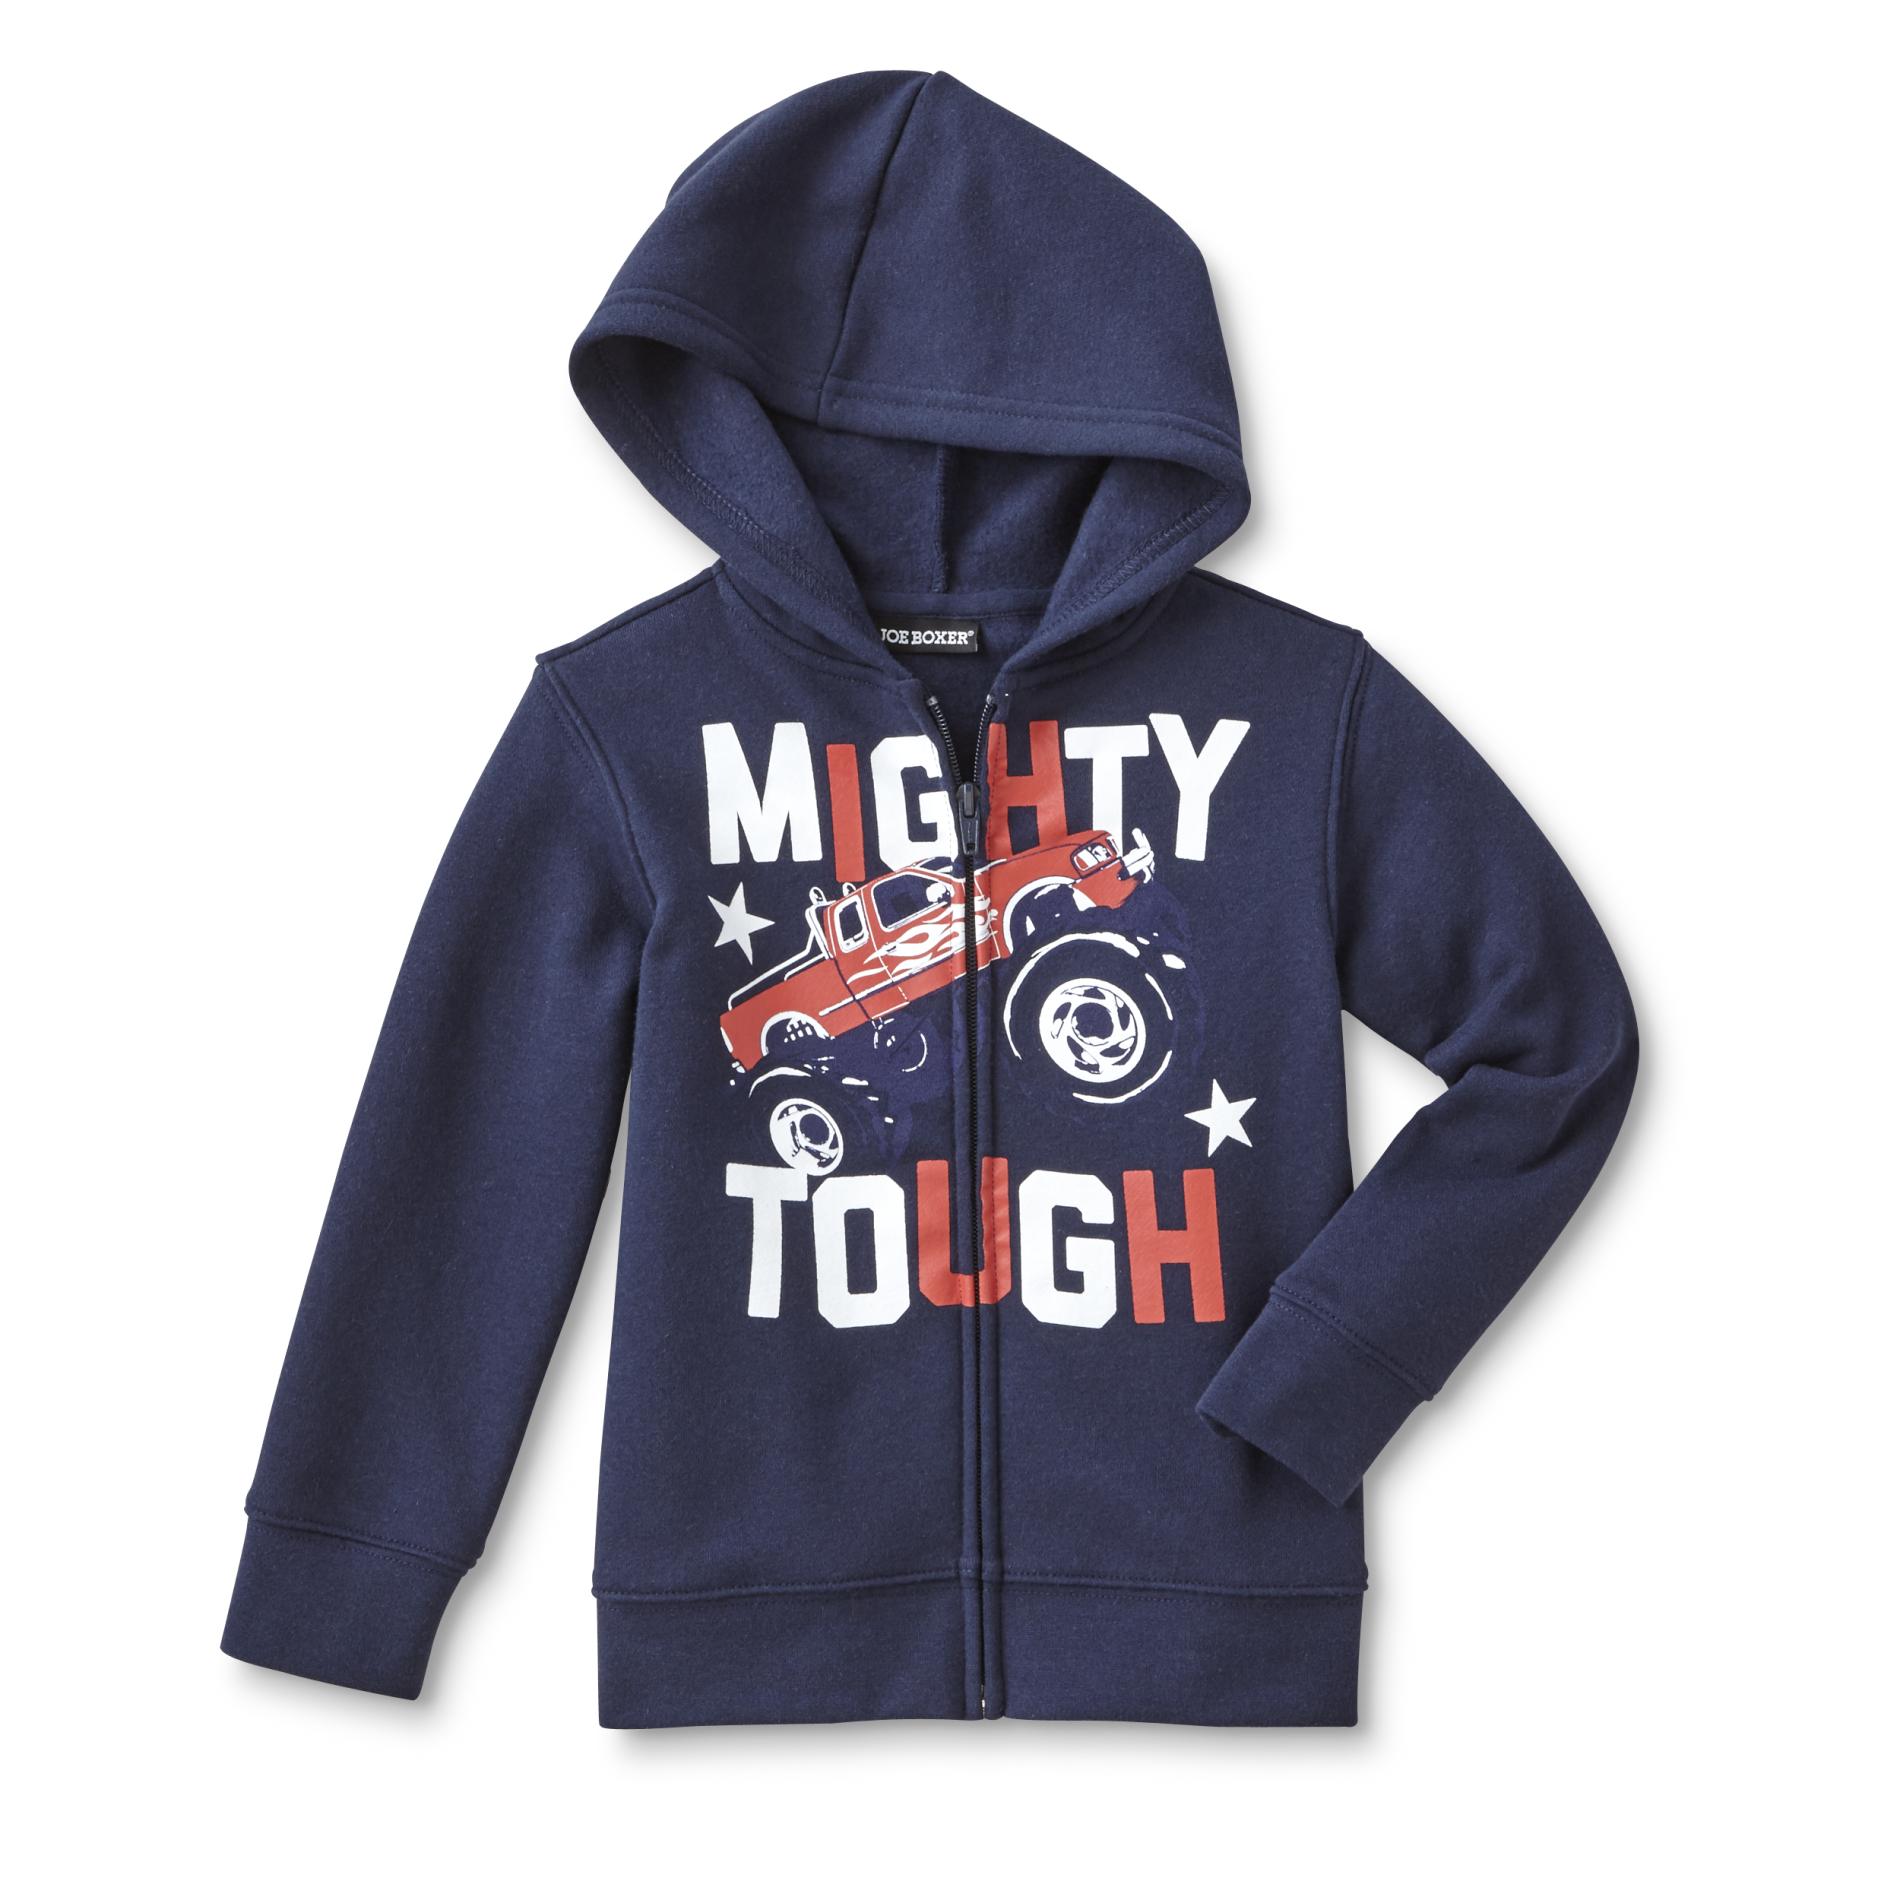 Joe Boxer Infant & Toddler Boys' Graphic Hoodie Jacket - Mighty Tough